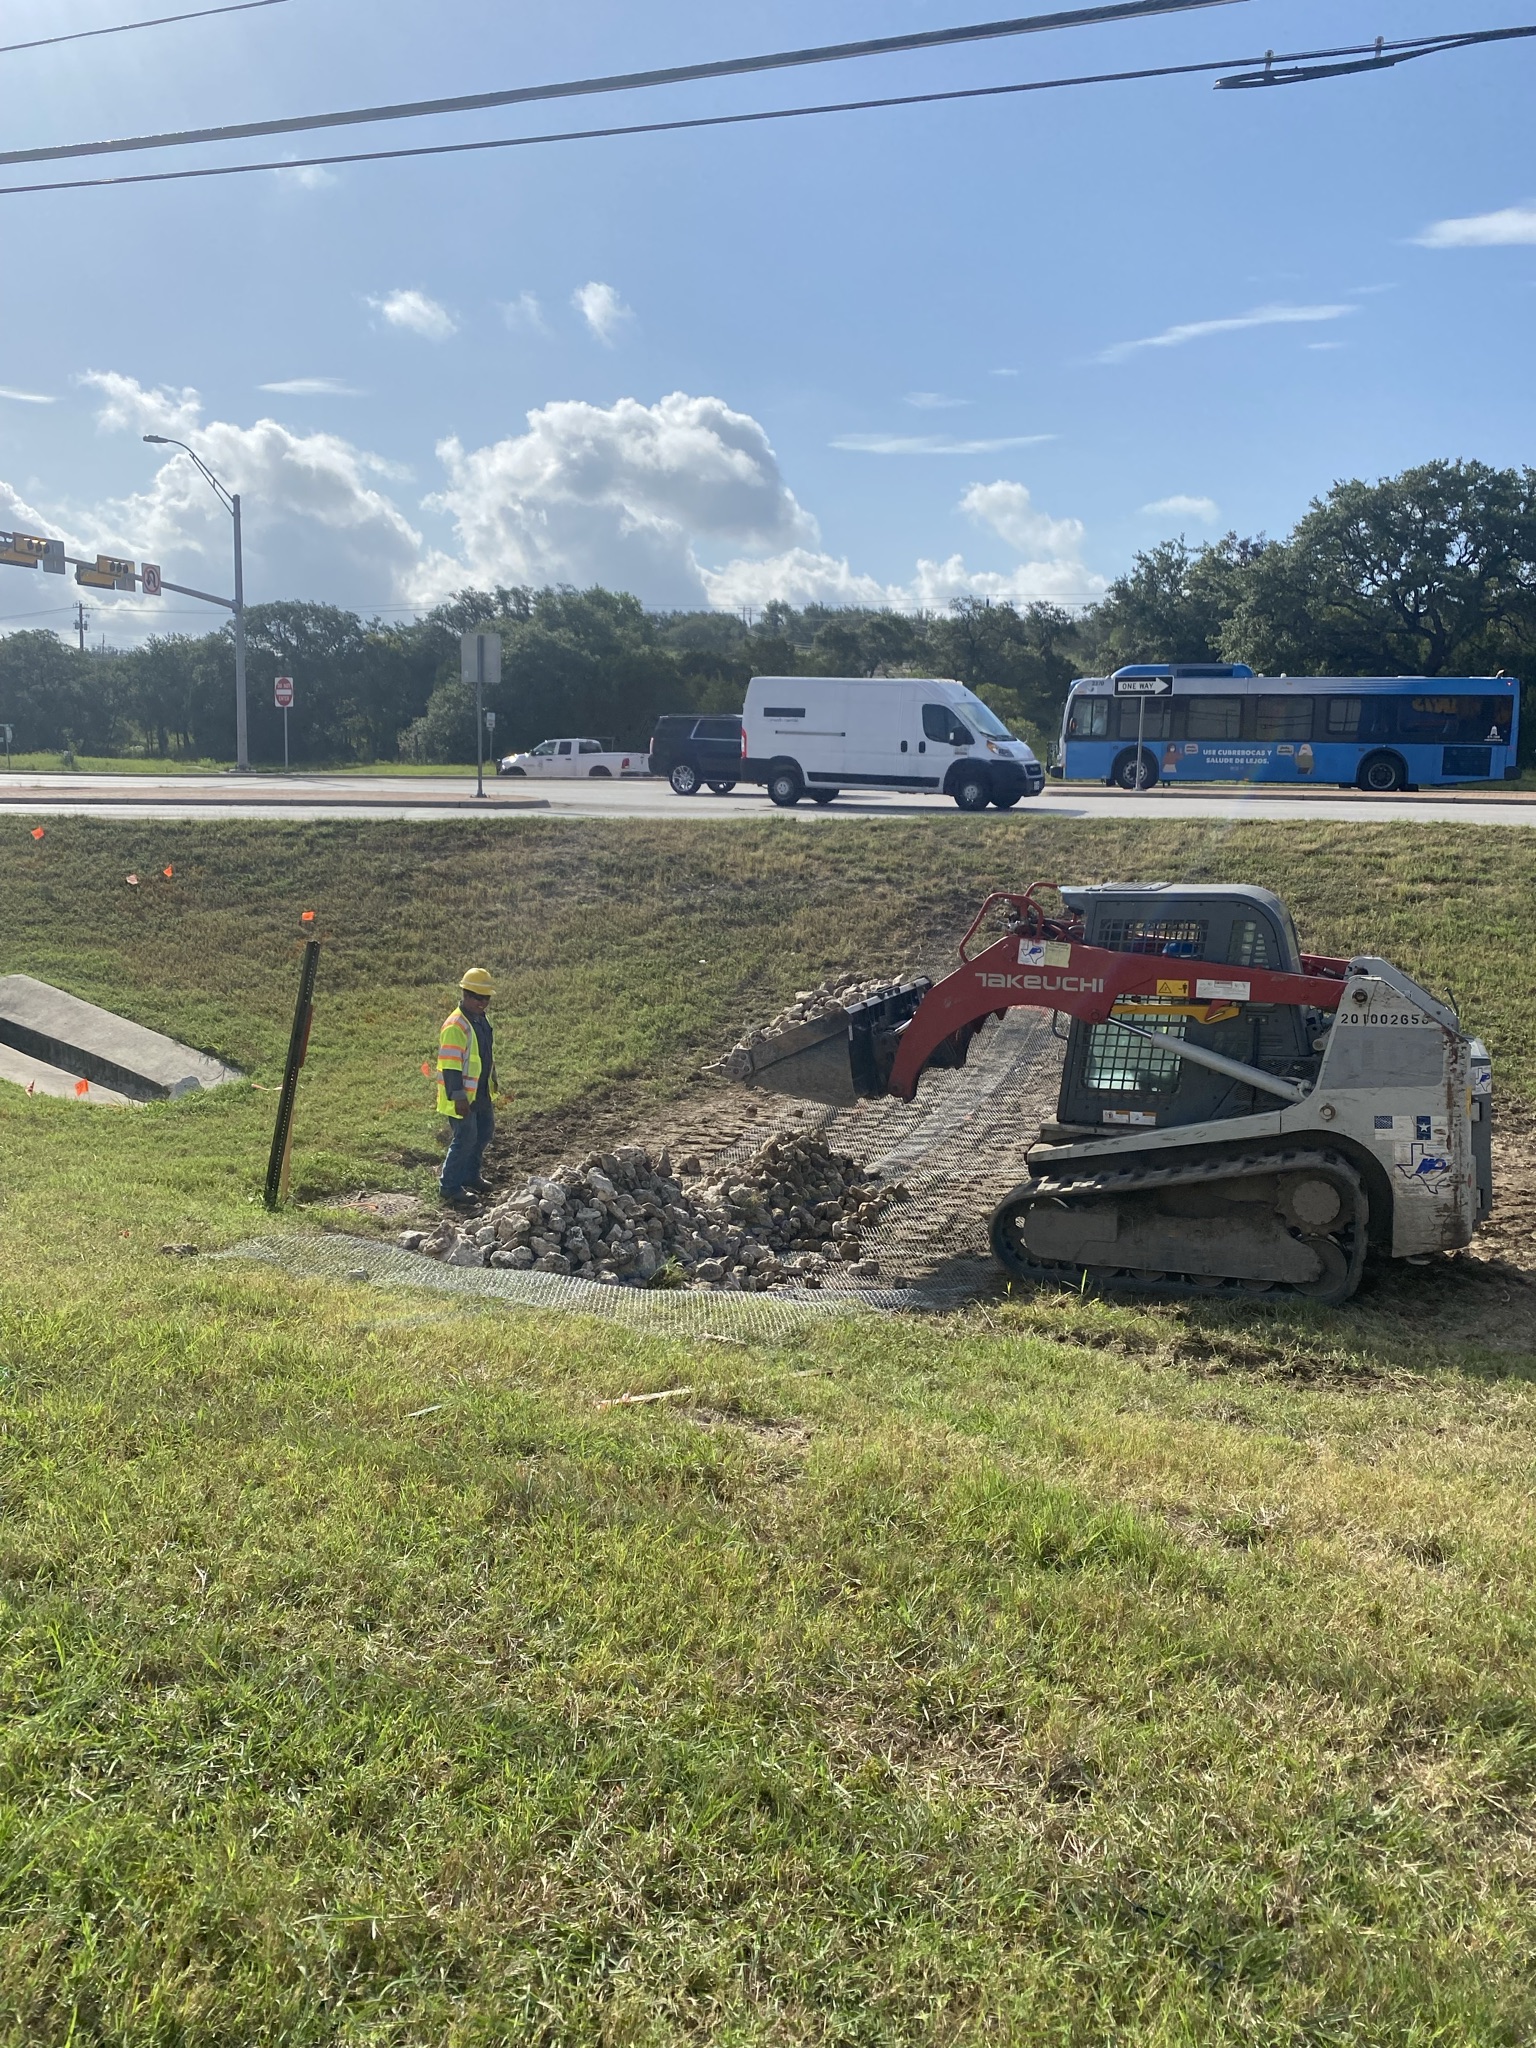 Crews install a rock filter dam near the US 290/SH 71 “Y” interchange, one of the many stormwater best management practices being used to protect the Edwards Aquifer during construction, August 2021